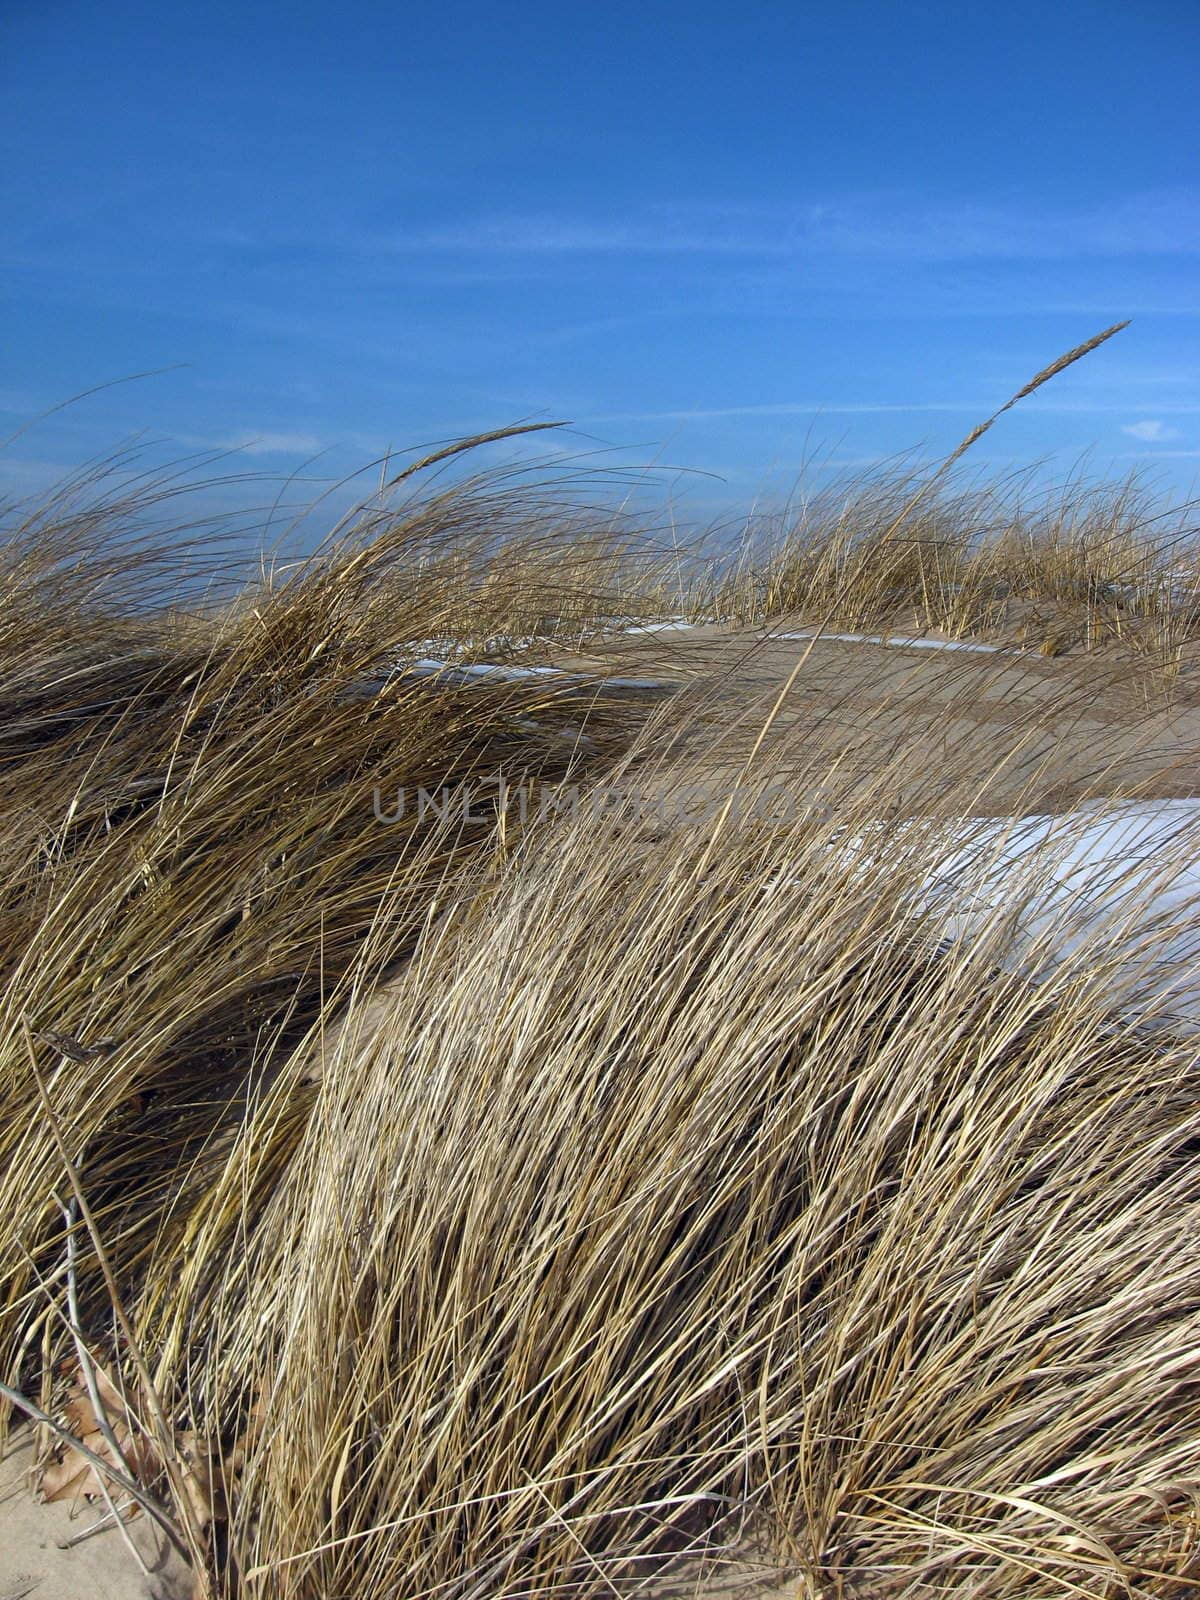 Beach Grass, Blowing in the Winter Wind by loongirl